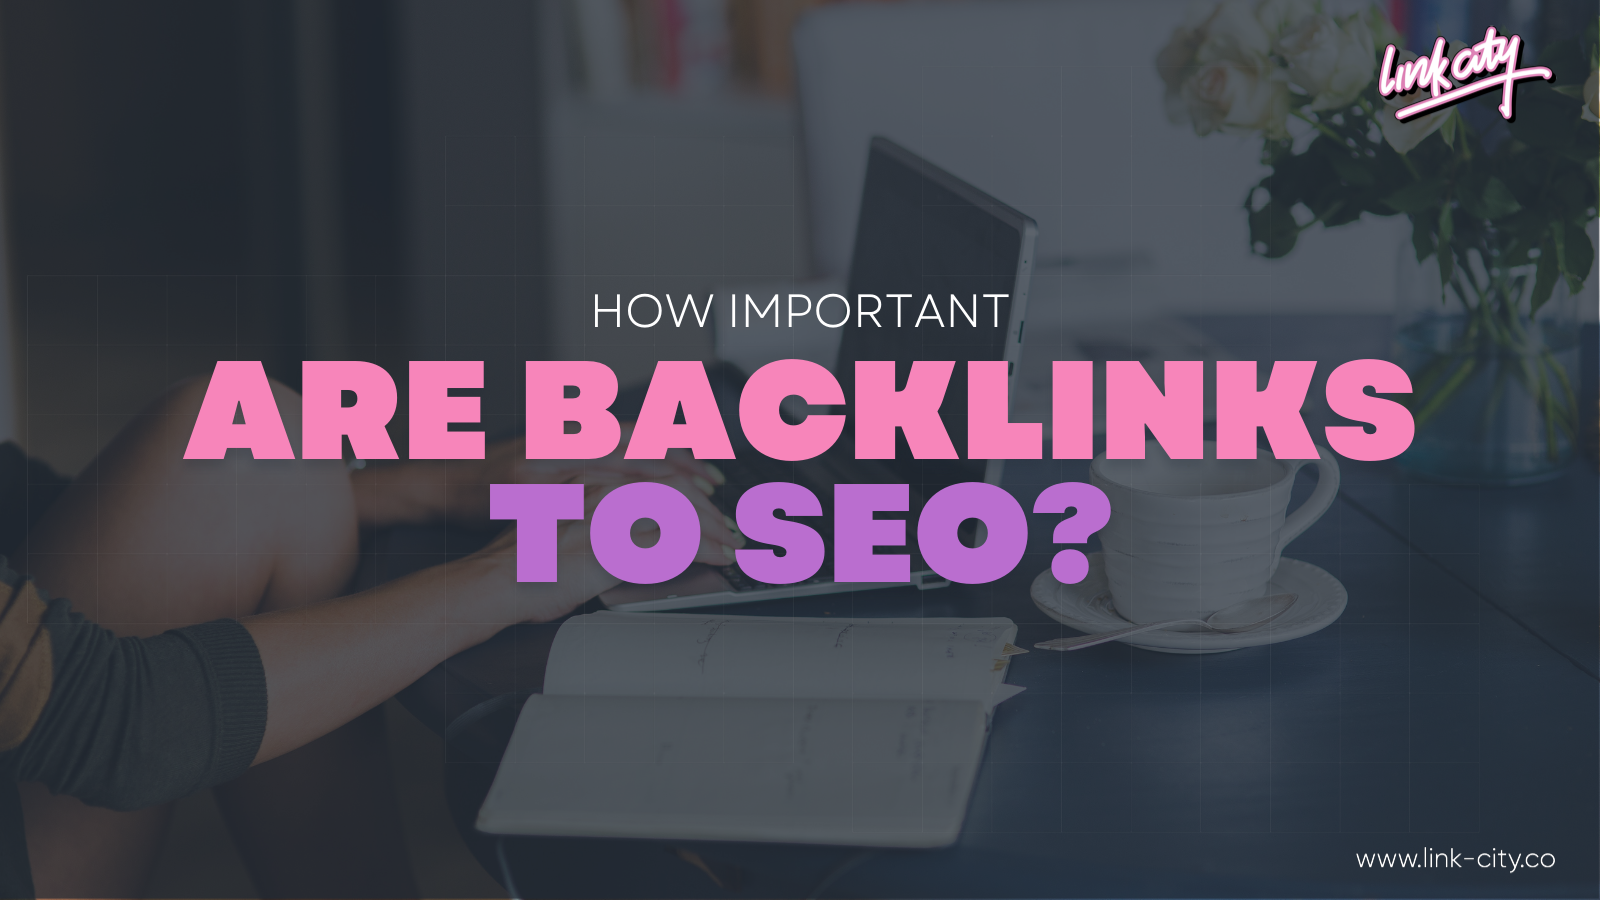 How Important Are Backlinks To SEO?